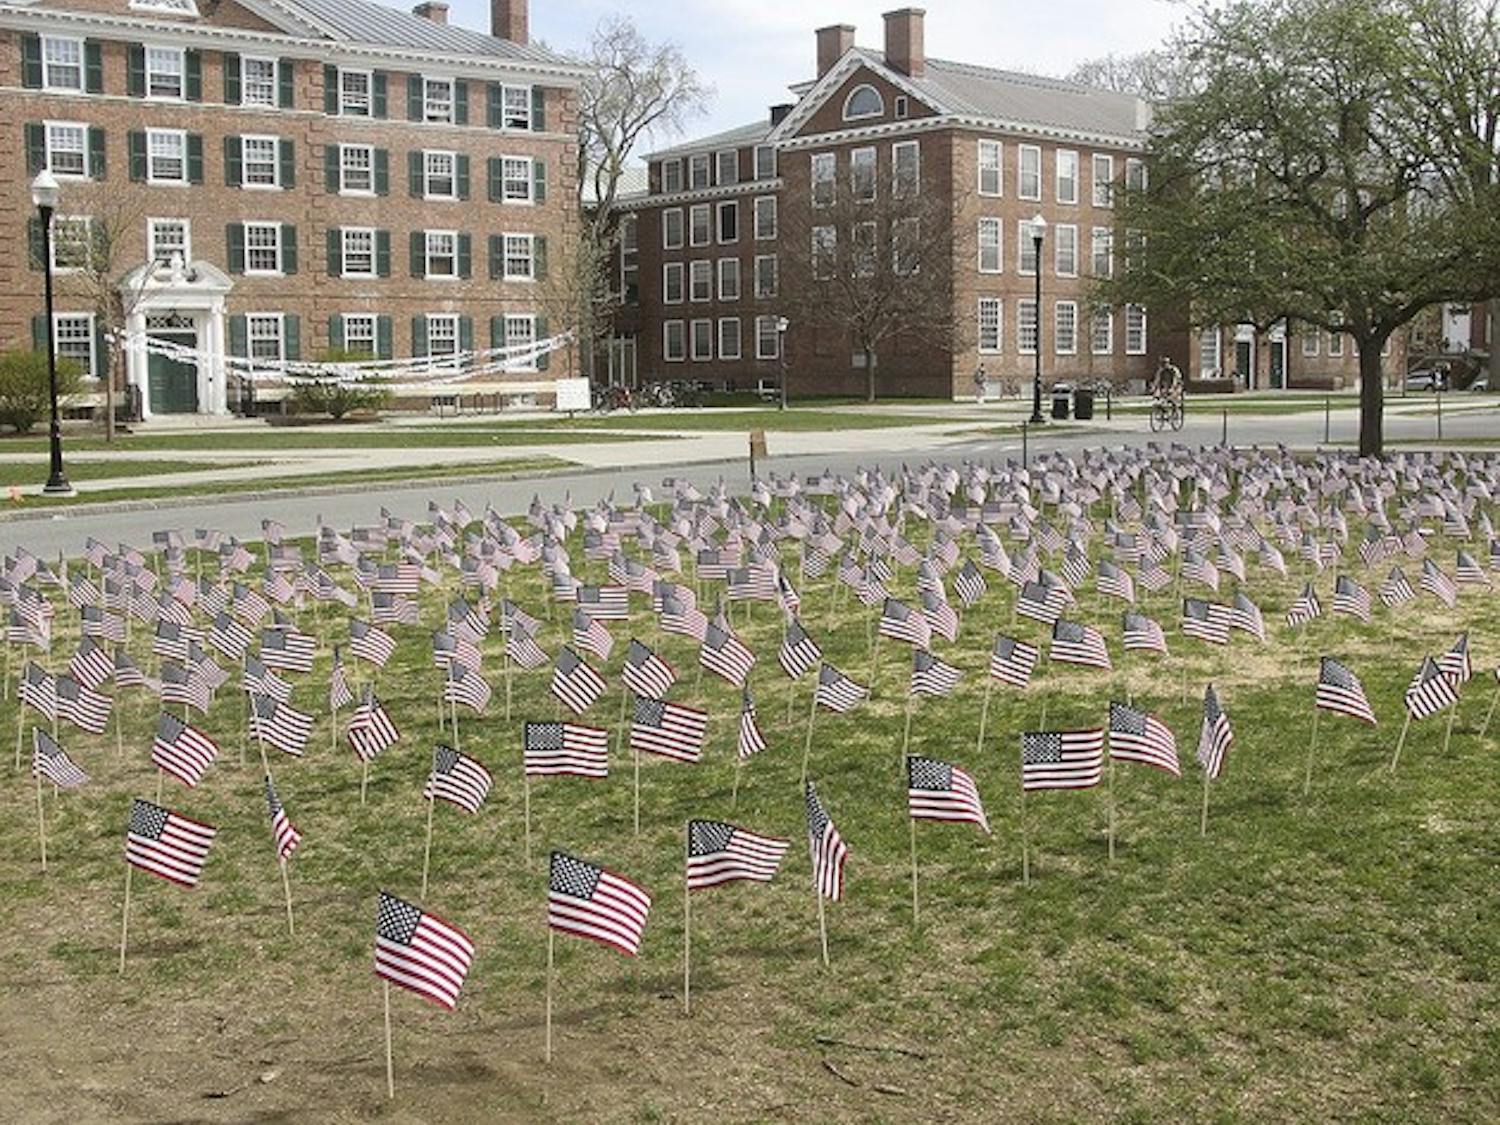 In an attempt to spur discussion about abortion, members of the pro-life organization Vita Clamantis planted 546 flags in the Gold Coast lawn.